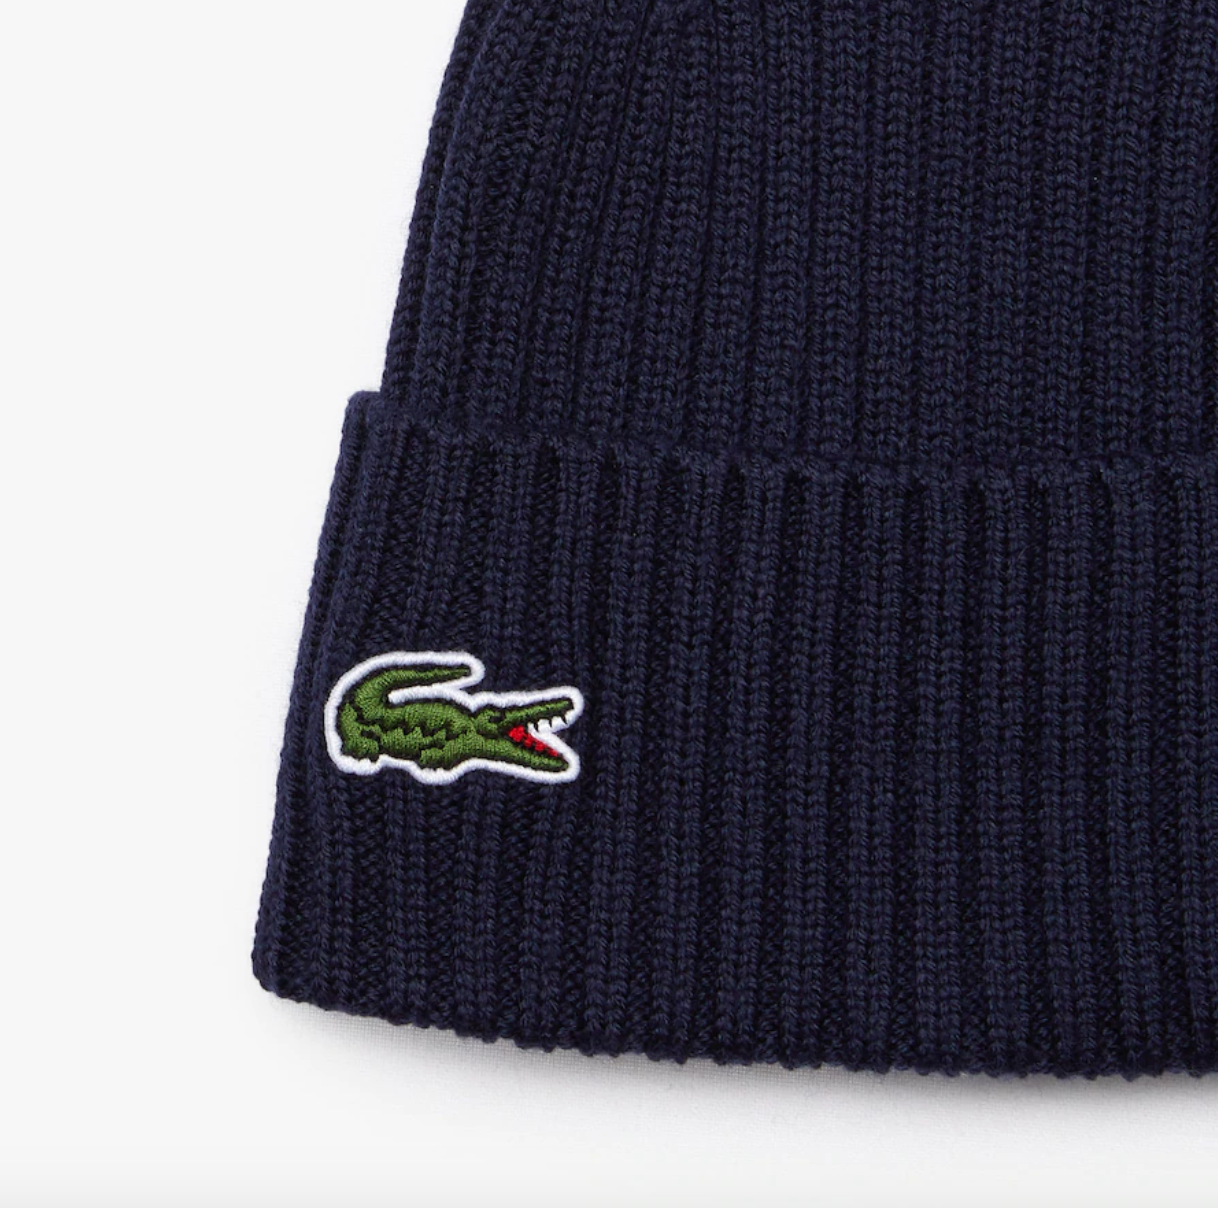 Lacoste Ribbed Wool Beanie - Navy Blue